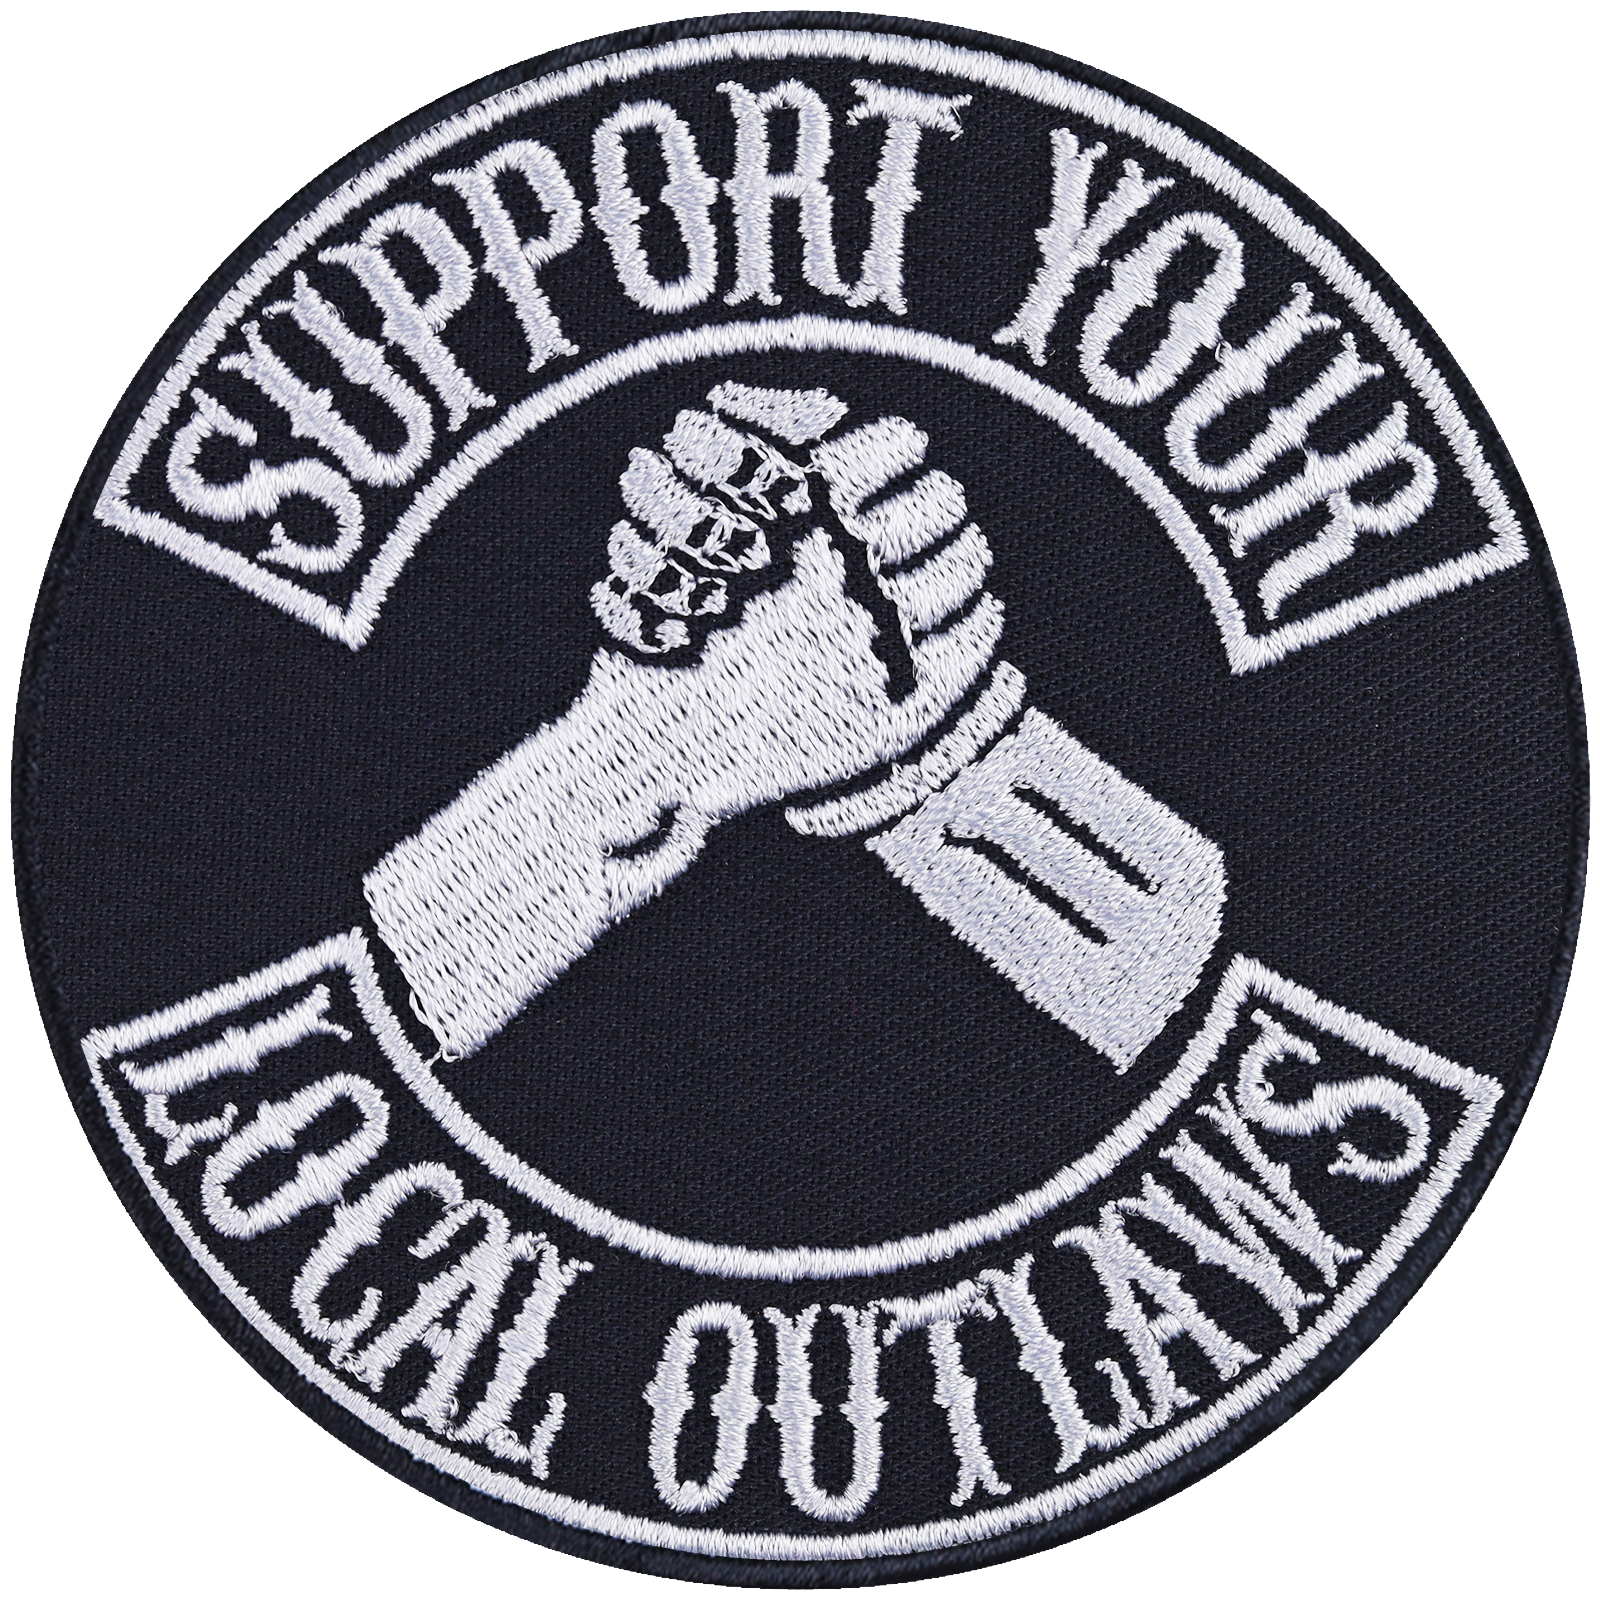 Support your local outlaws - Patch